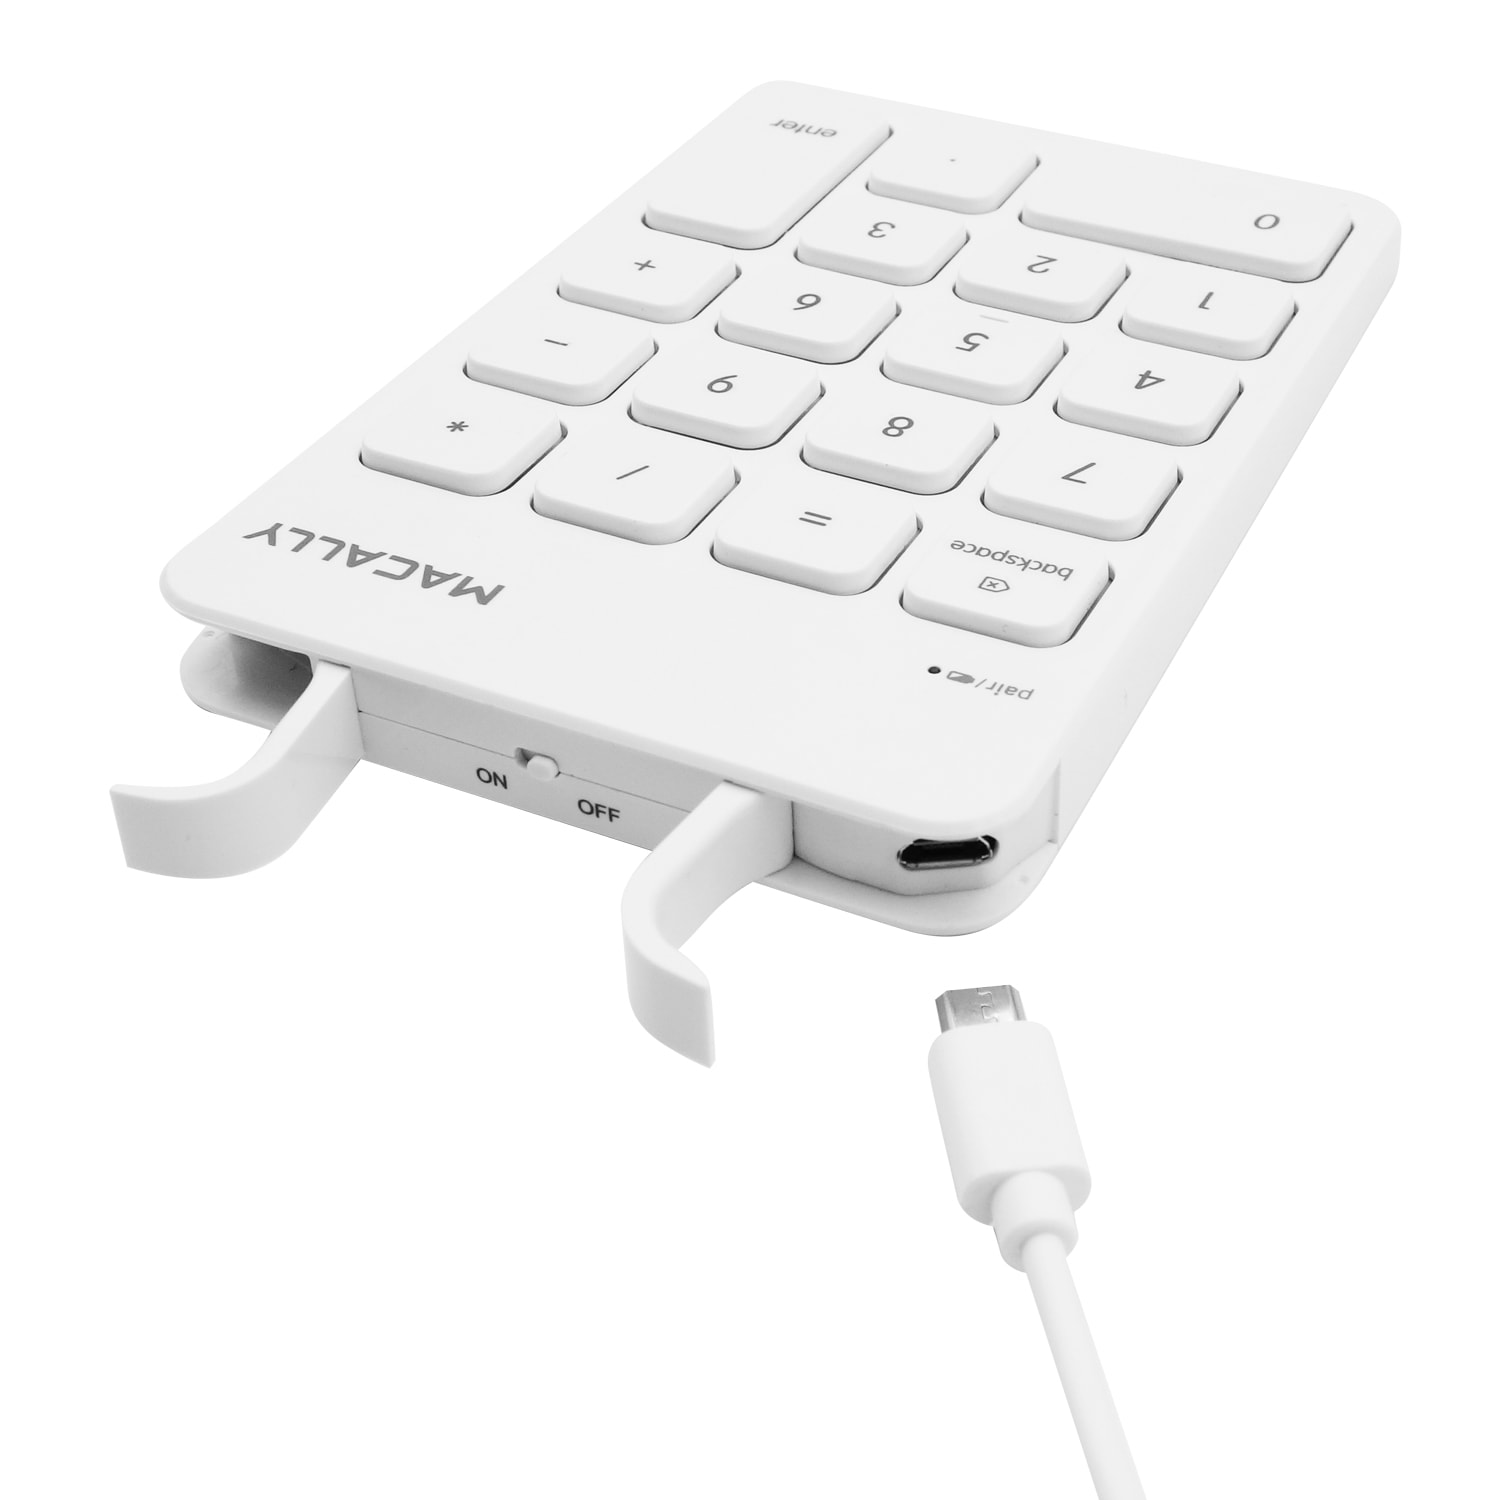 Macally Macally Wireless Bluetooth Numeric Keyboard For Laptop, Apple Imac Macbook Pro/air, Ipad Windows Pc, Tablet, or Desktop Computer Rechargeable 18 Key Slim Number Numerical Numpad- White in the